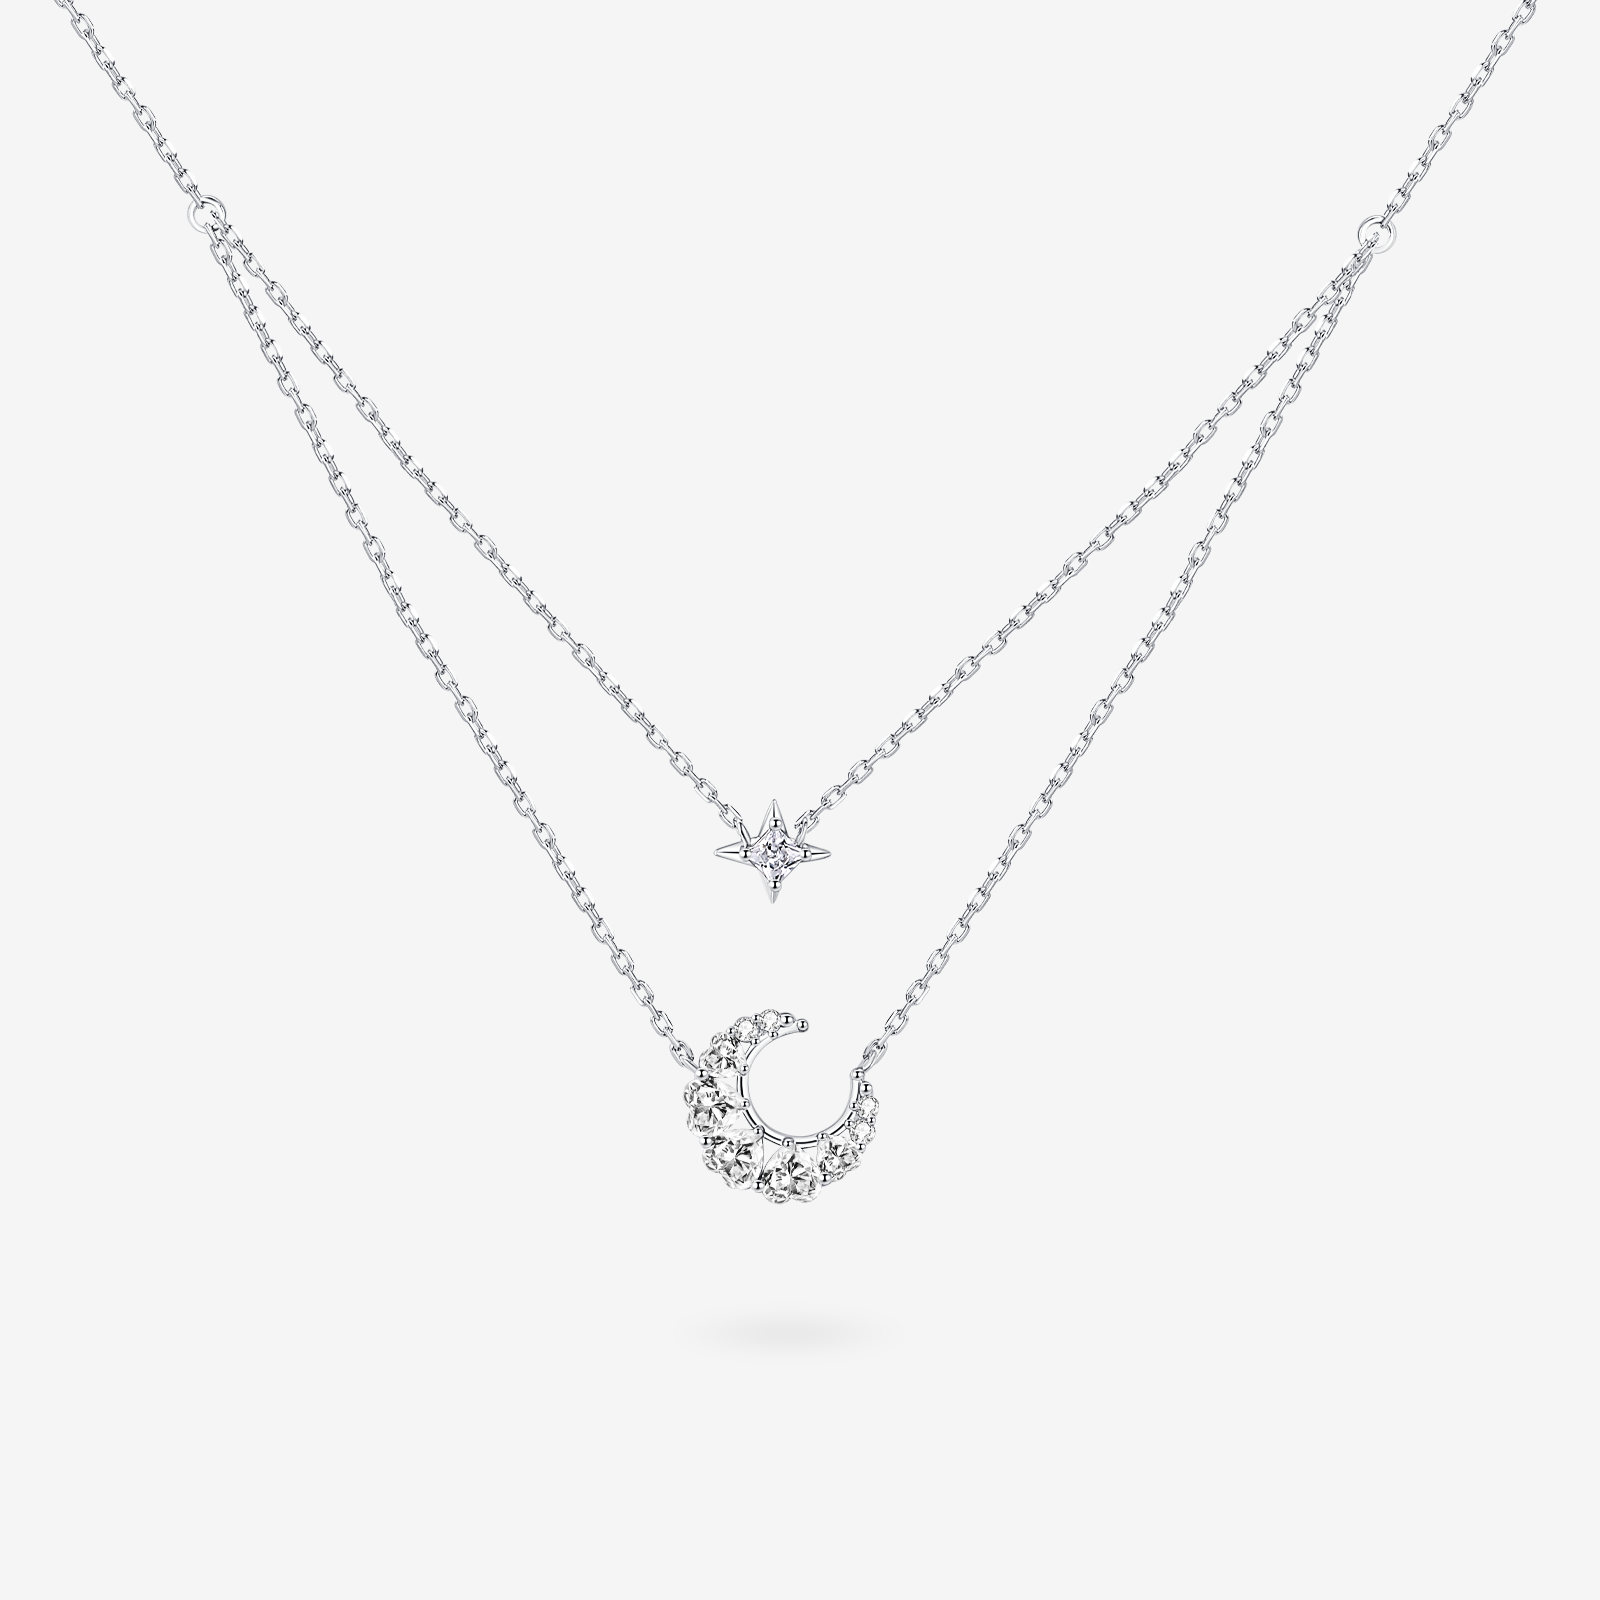 Fanci "Dazzling Dream" Crescent Moon Star Sterling Silver Necklace Main